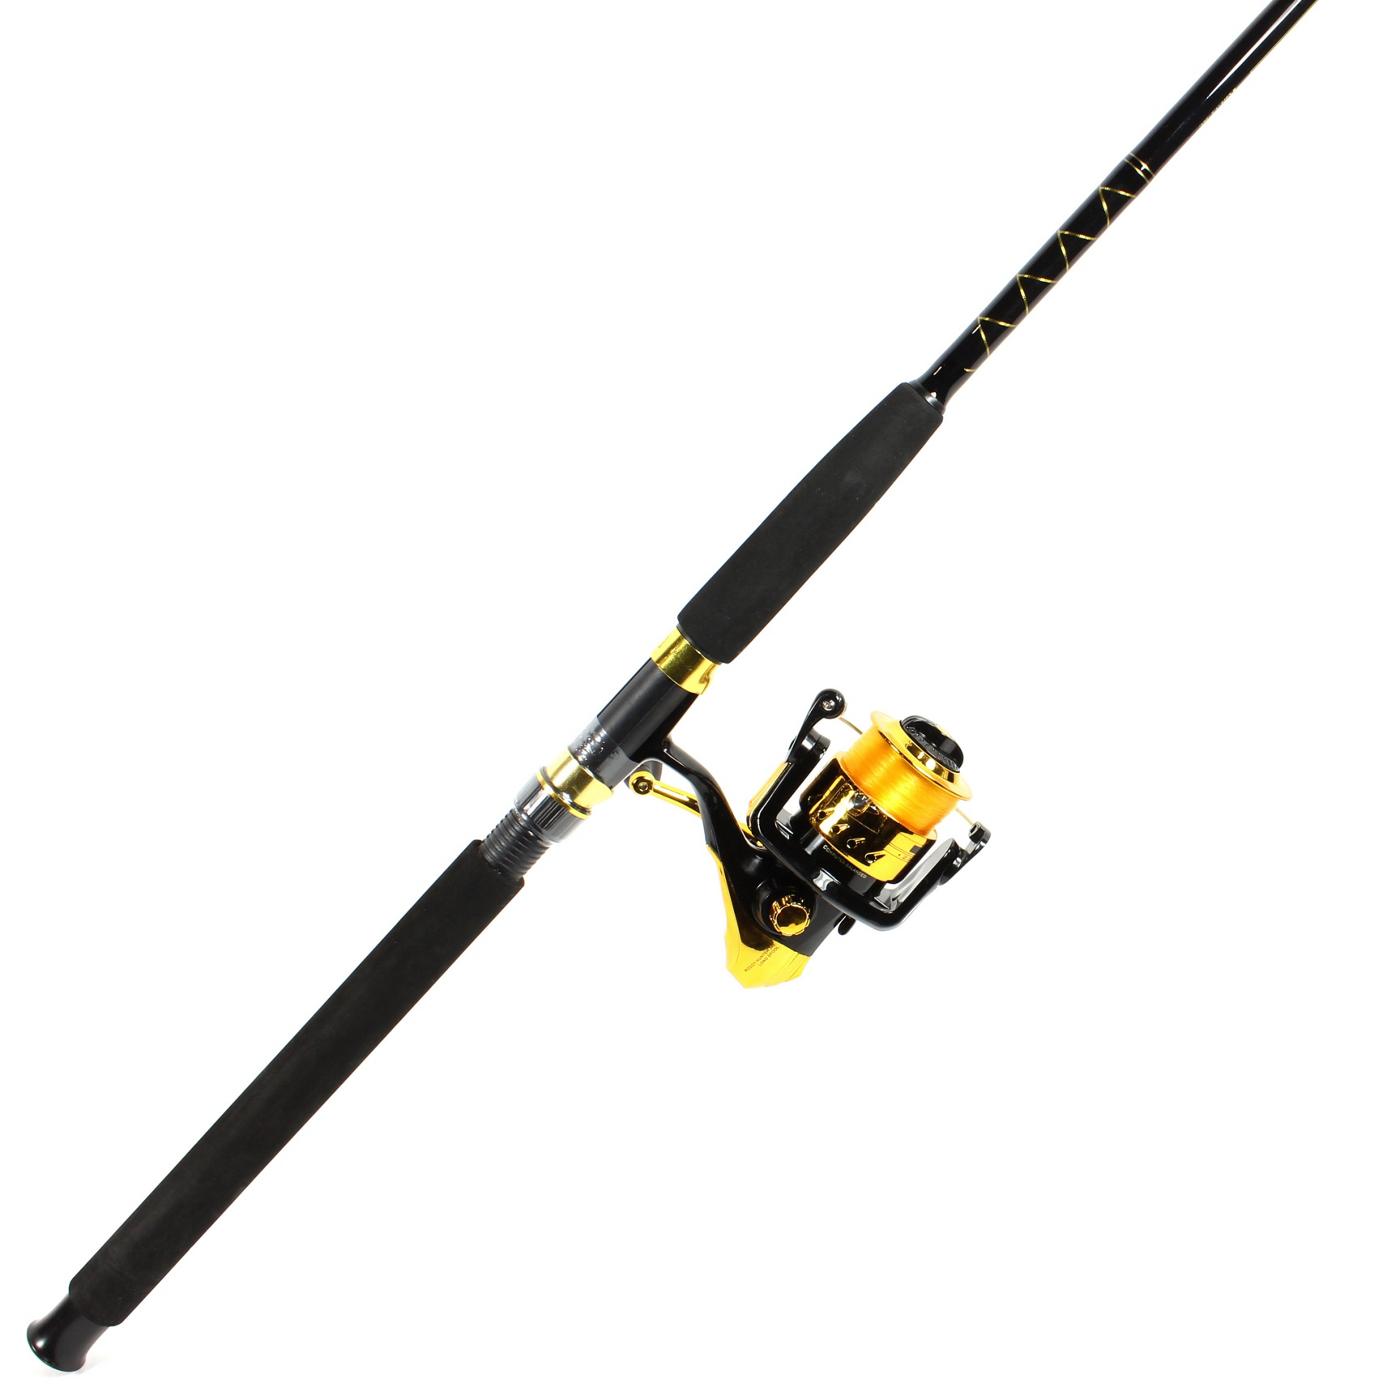 Master 7' 2 Piece Saltwater Spinning Combo Rod - Shop Fishing at H-E-B